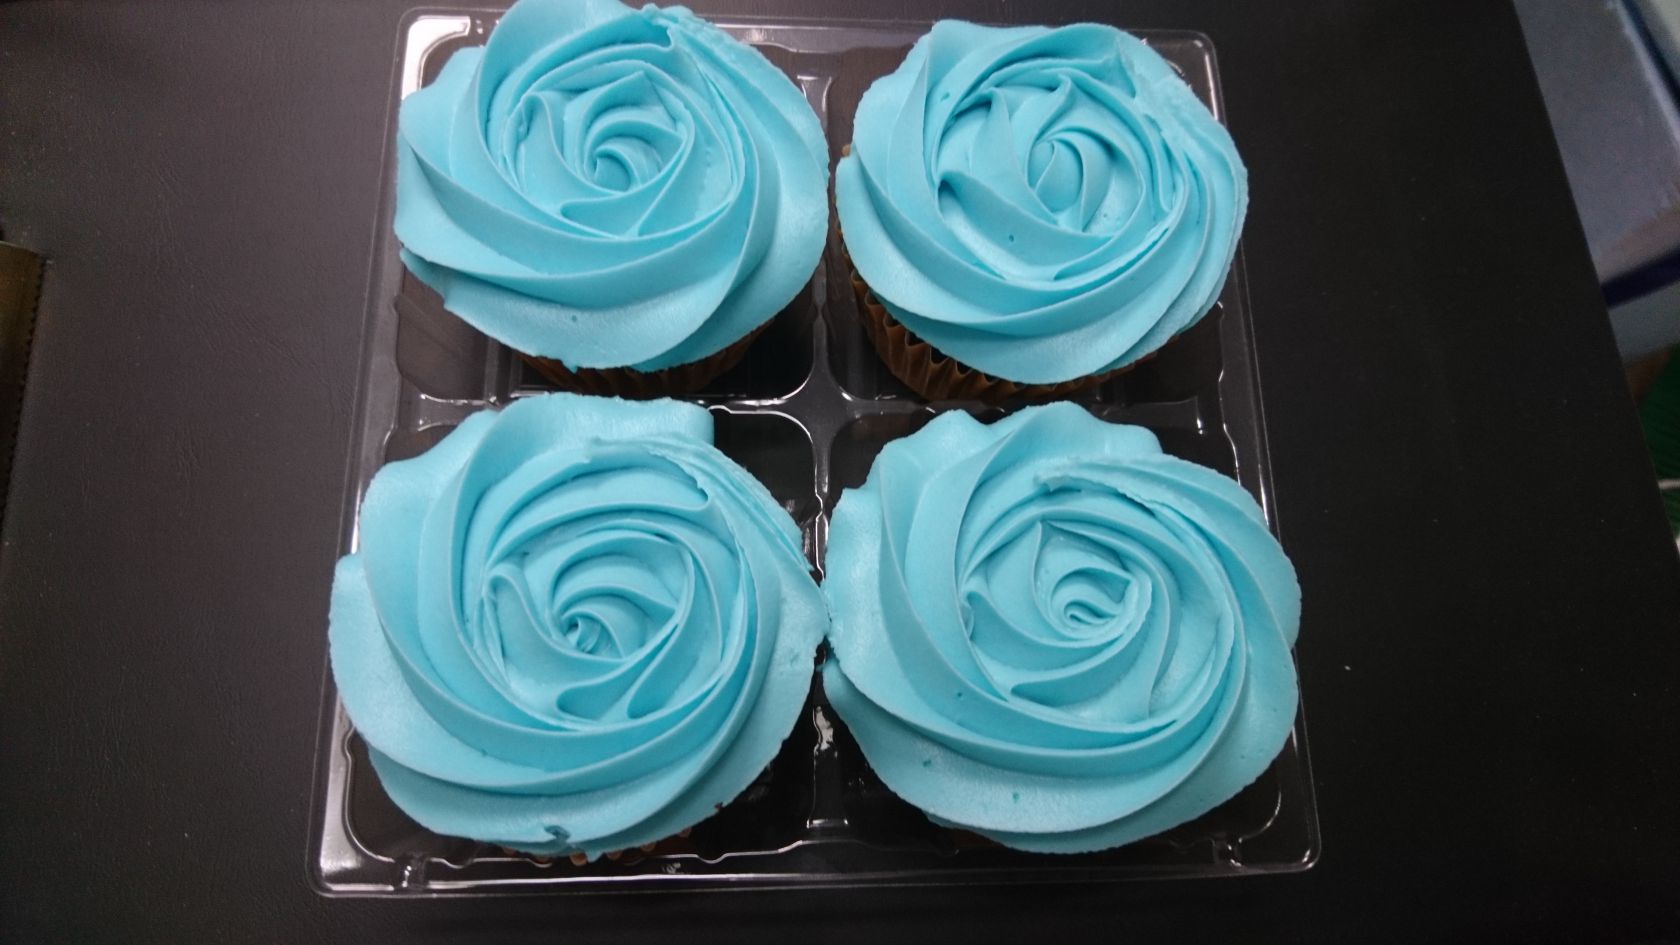 Thomas the Baker Forget-Me-Not cupcakes for Alzheimer's Society